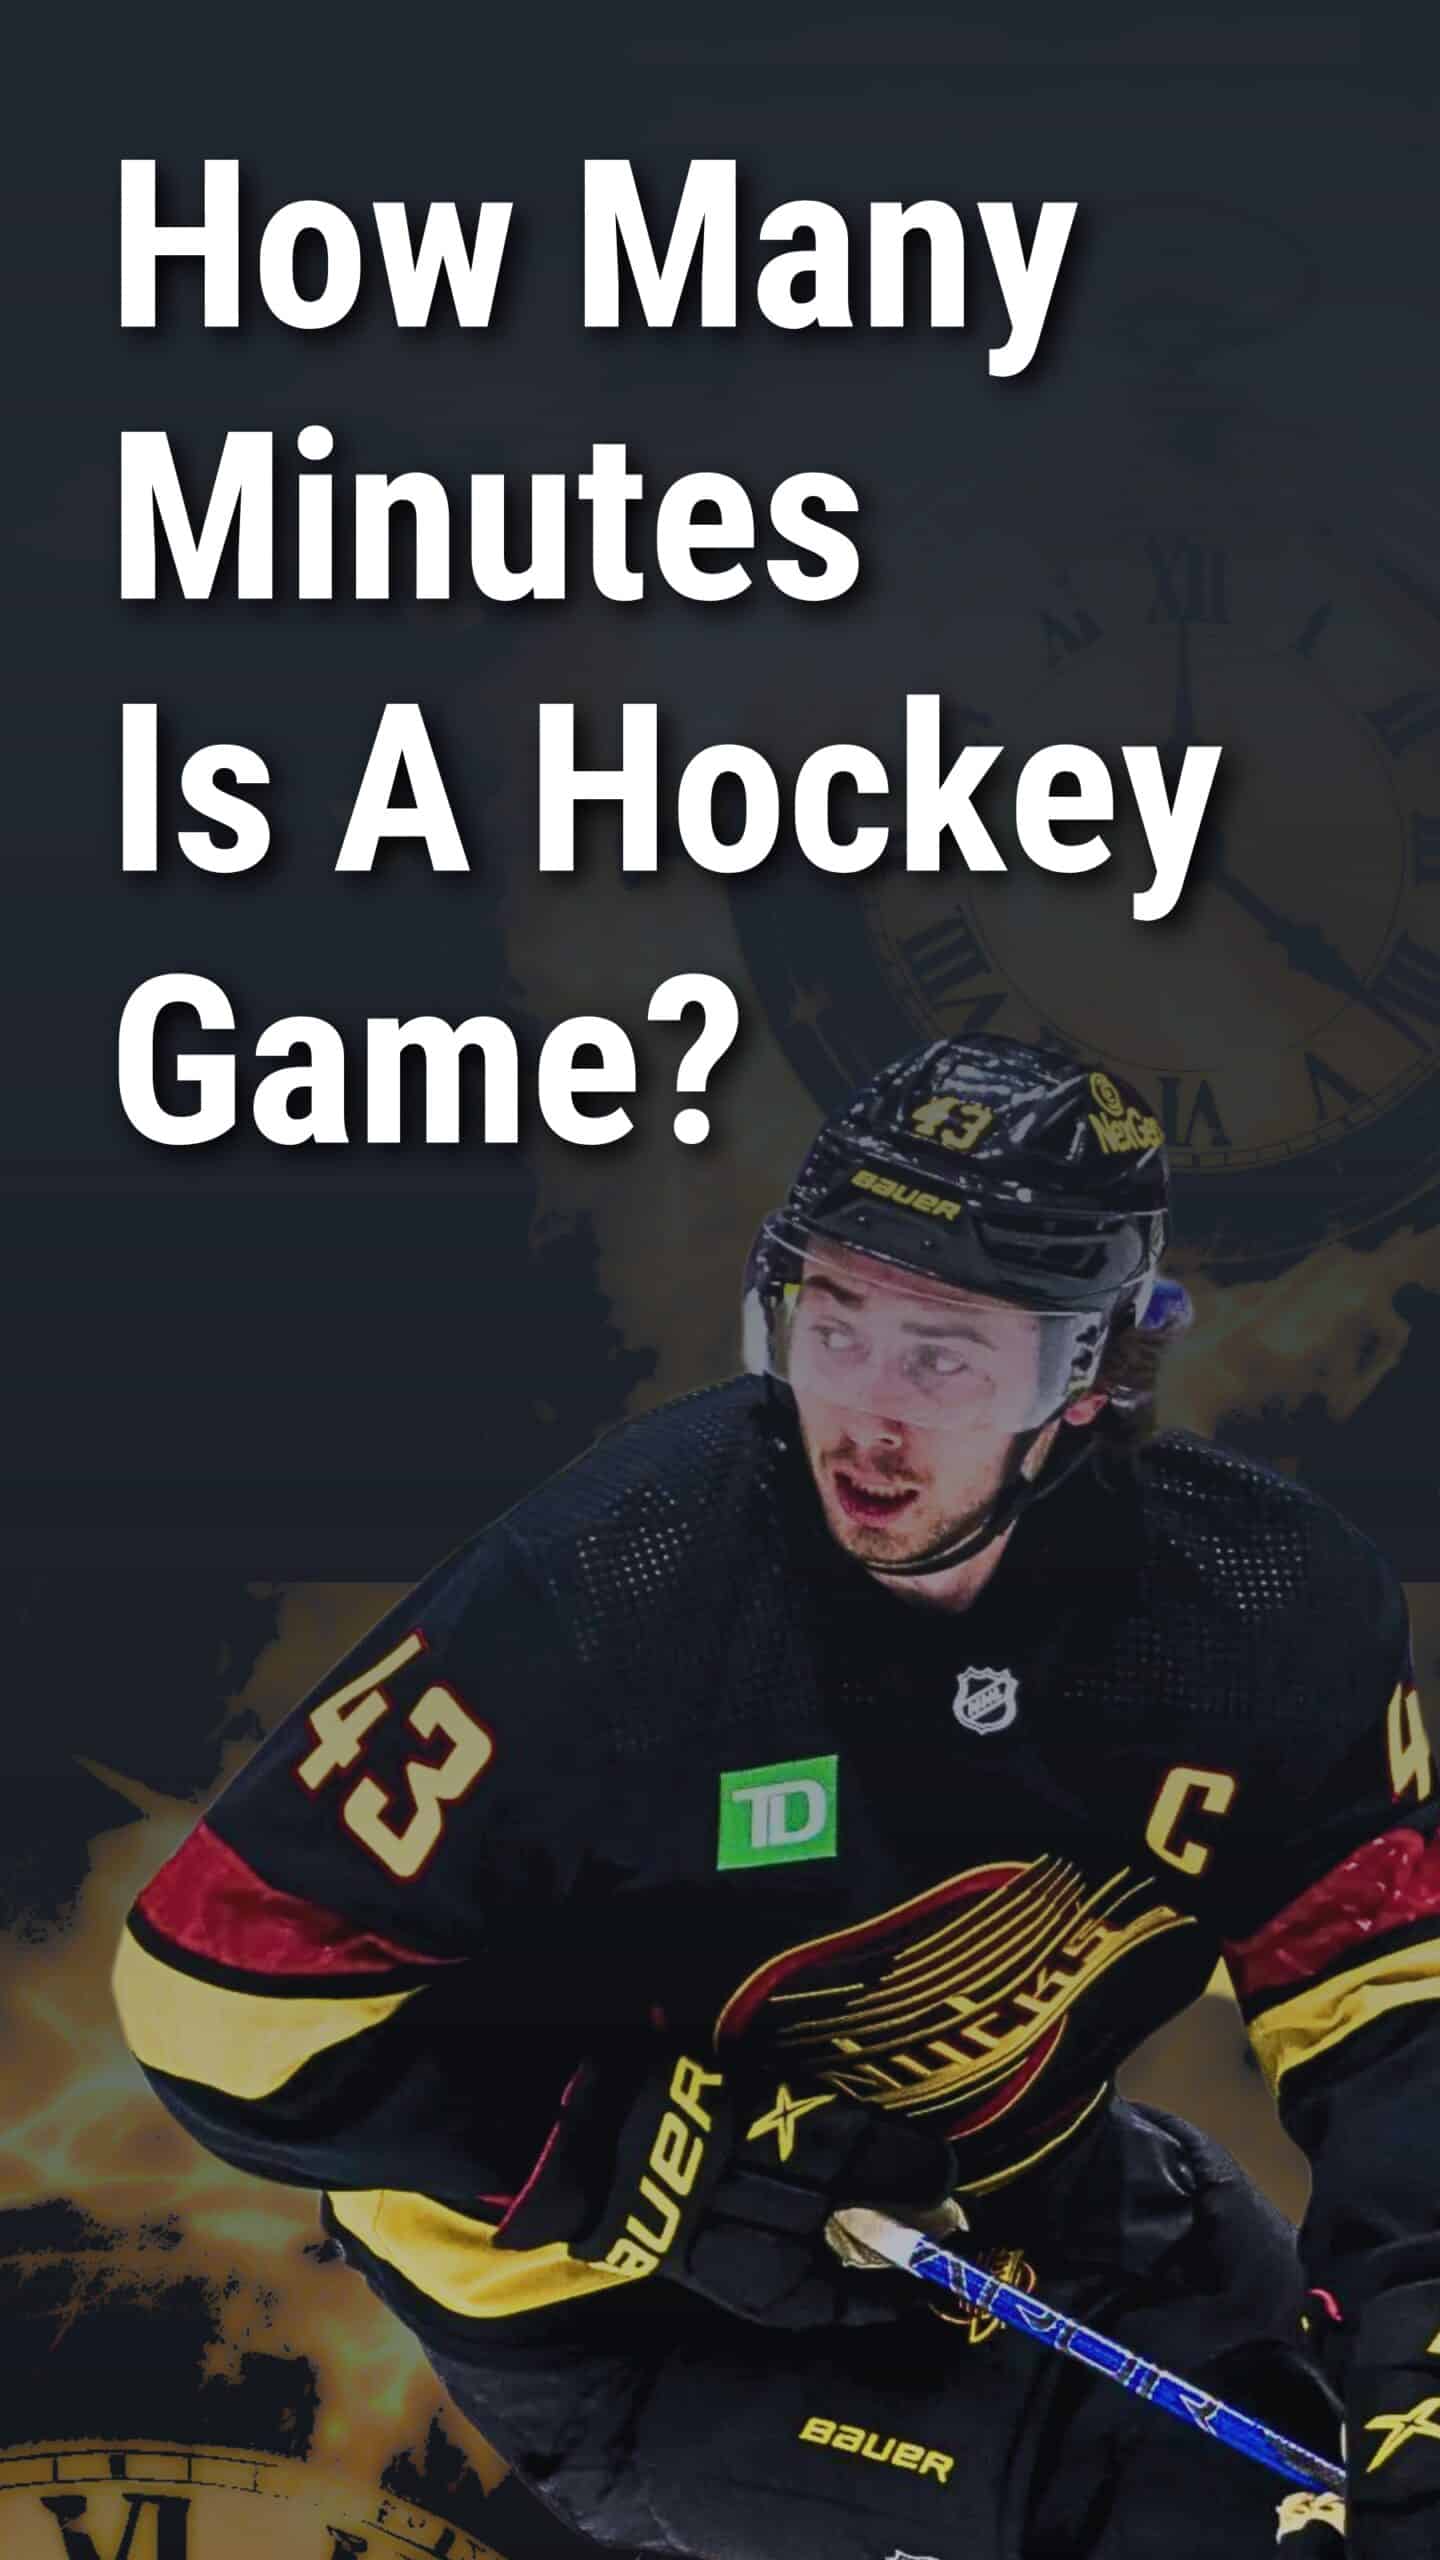 How Many Minutes Is A Hockey Game?